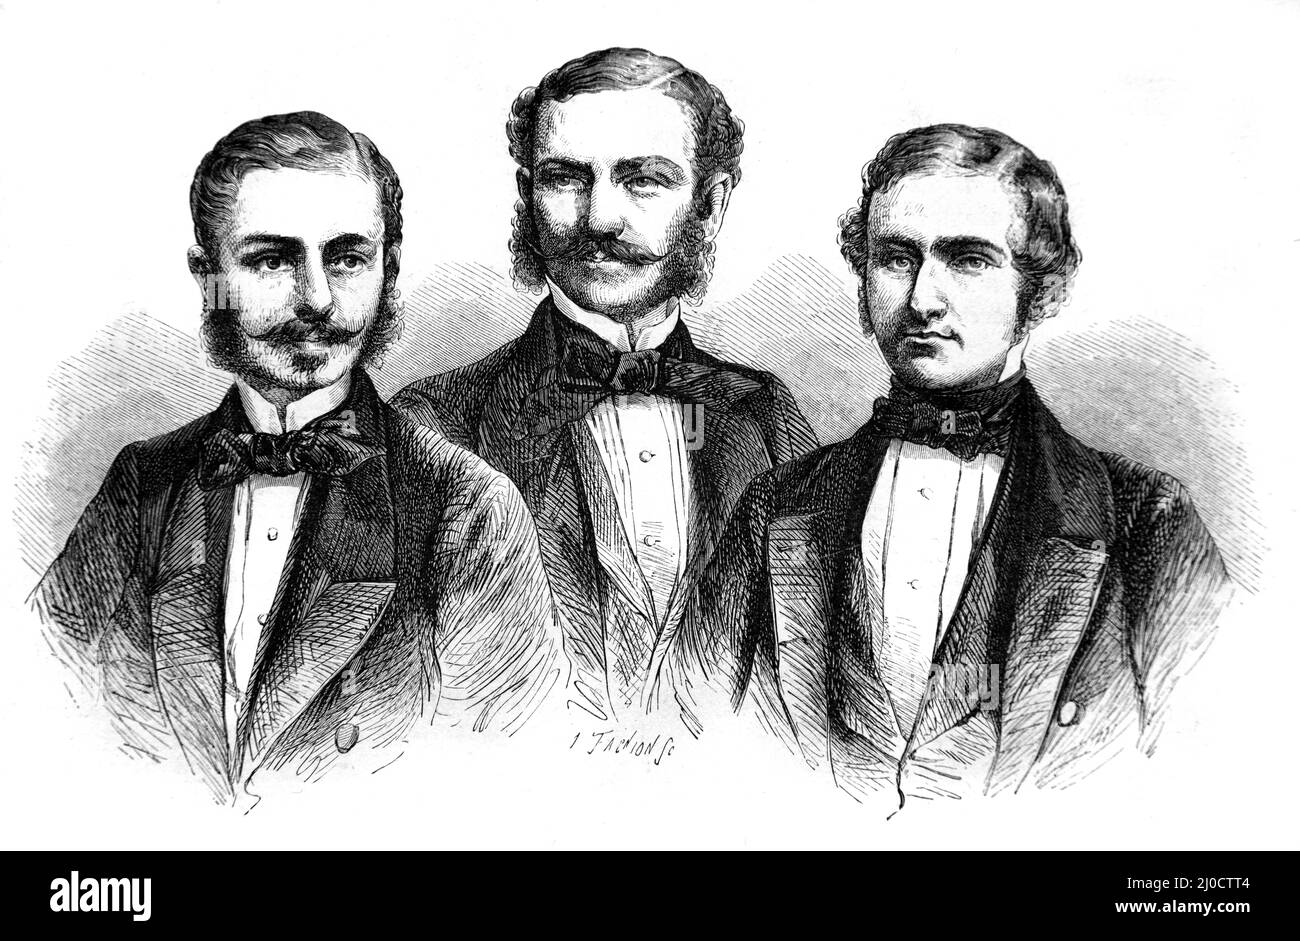 Portrait of the Three Schlagintweit Brothers, from left, Robert Schlagintweit (1833-1885), Hermann Schlagintweit (1826-1882) and Adolf von Schlagintweit ((1829-1857) German Explorers and Travellers in Central Asia. Vintage Illustration or Engraving 1860. Stock Photo